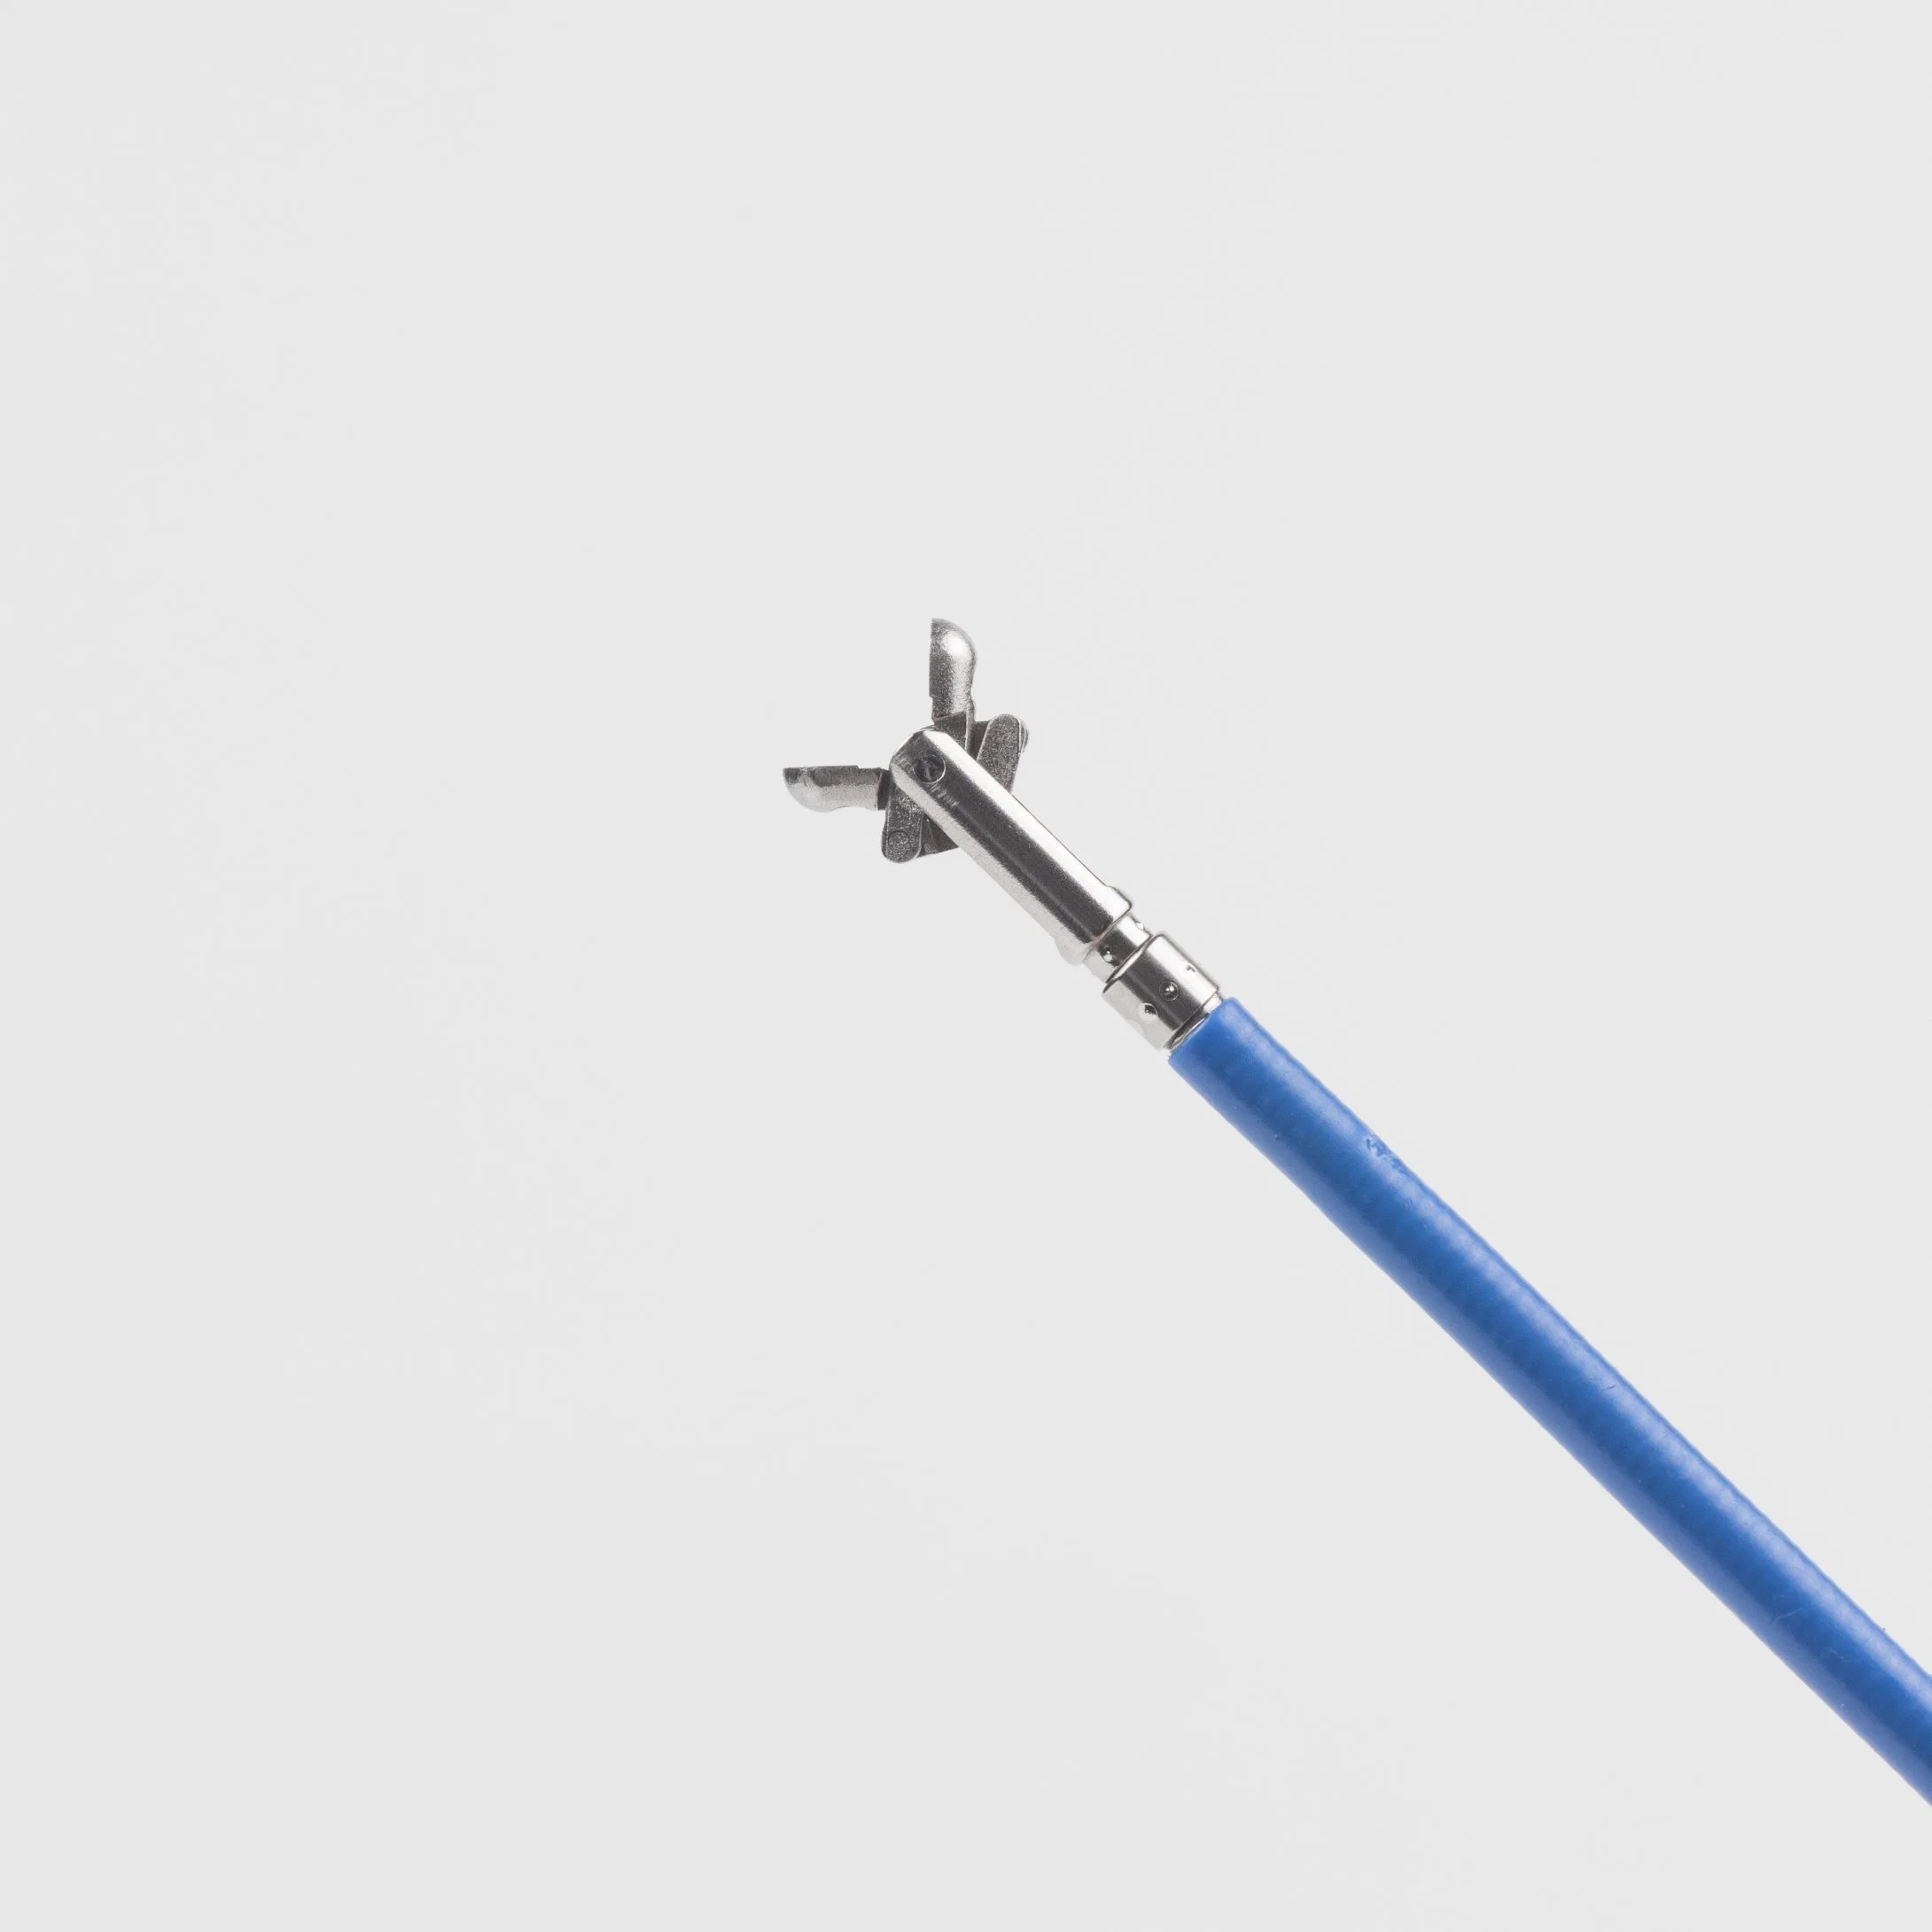 Endoscopy Accessories Disposable Biopsy Forceps for Medical Use with CE ISO